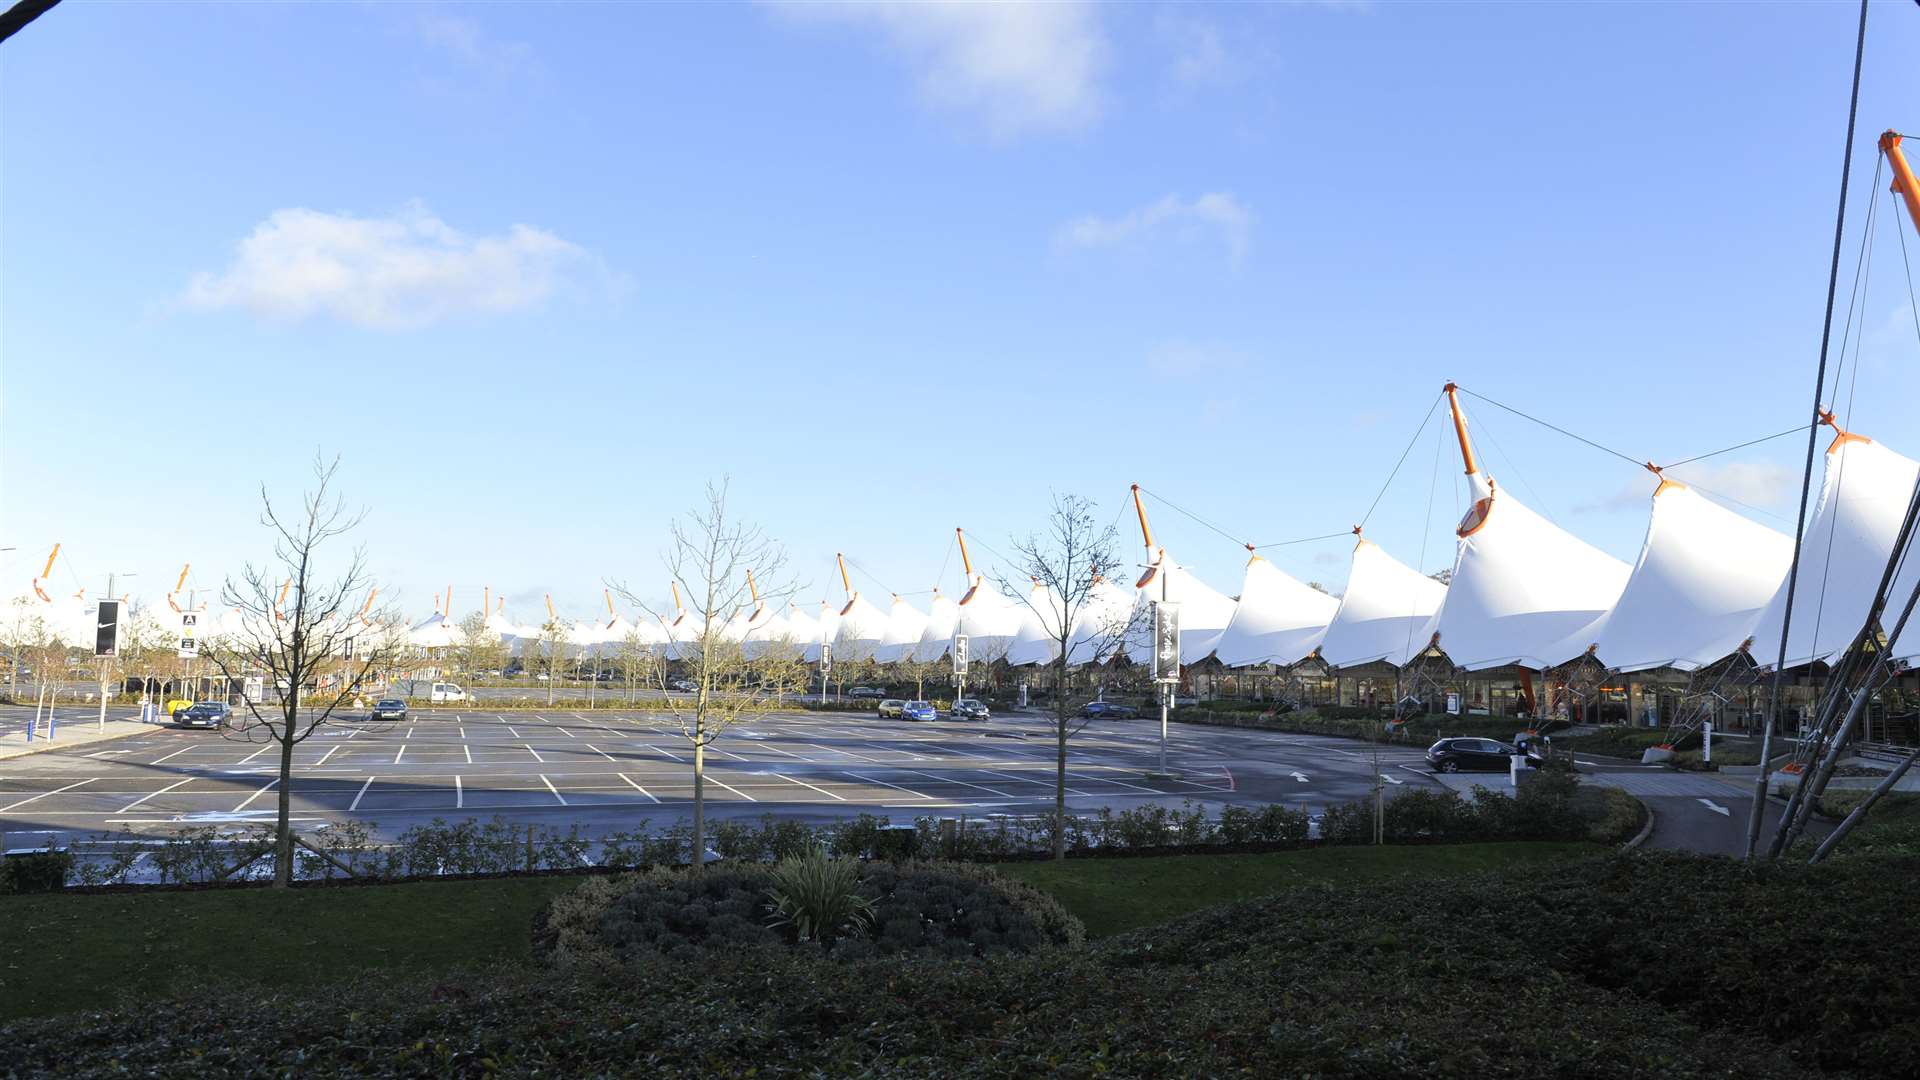 Osprey London will open this week at the Designer Outlet